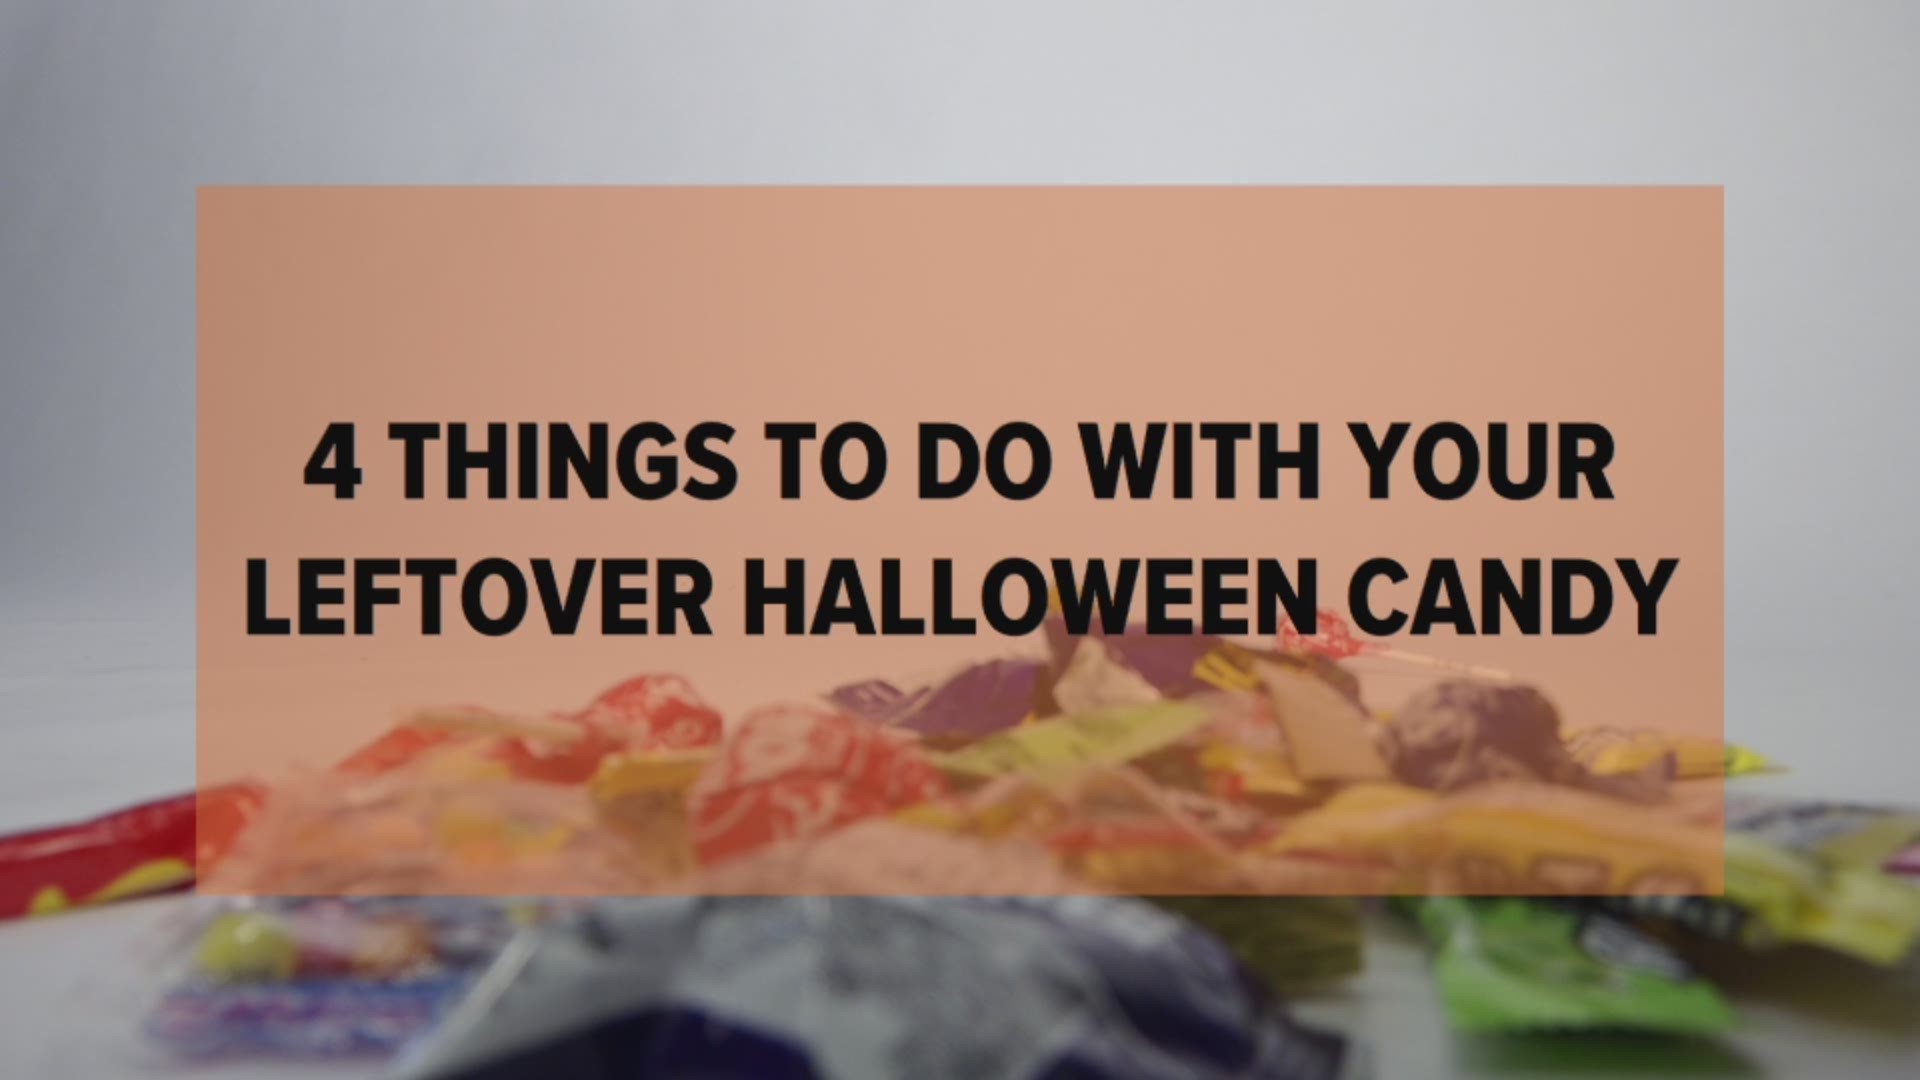 What to Do with Leftover Halloween Candy?